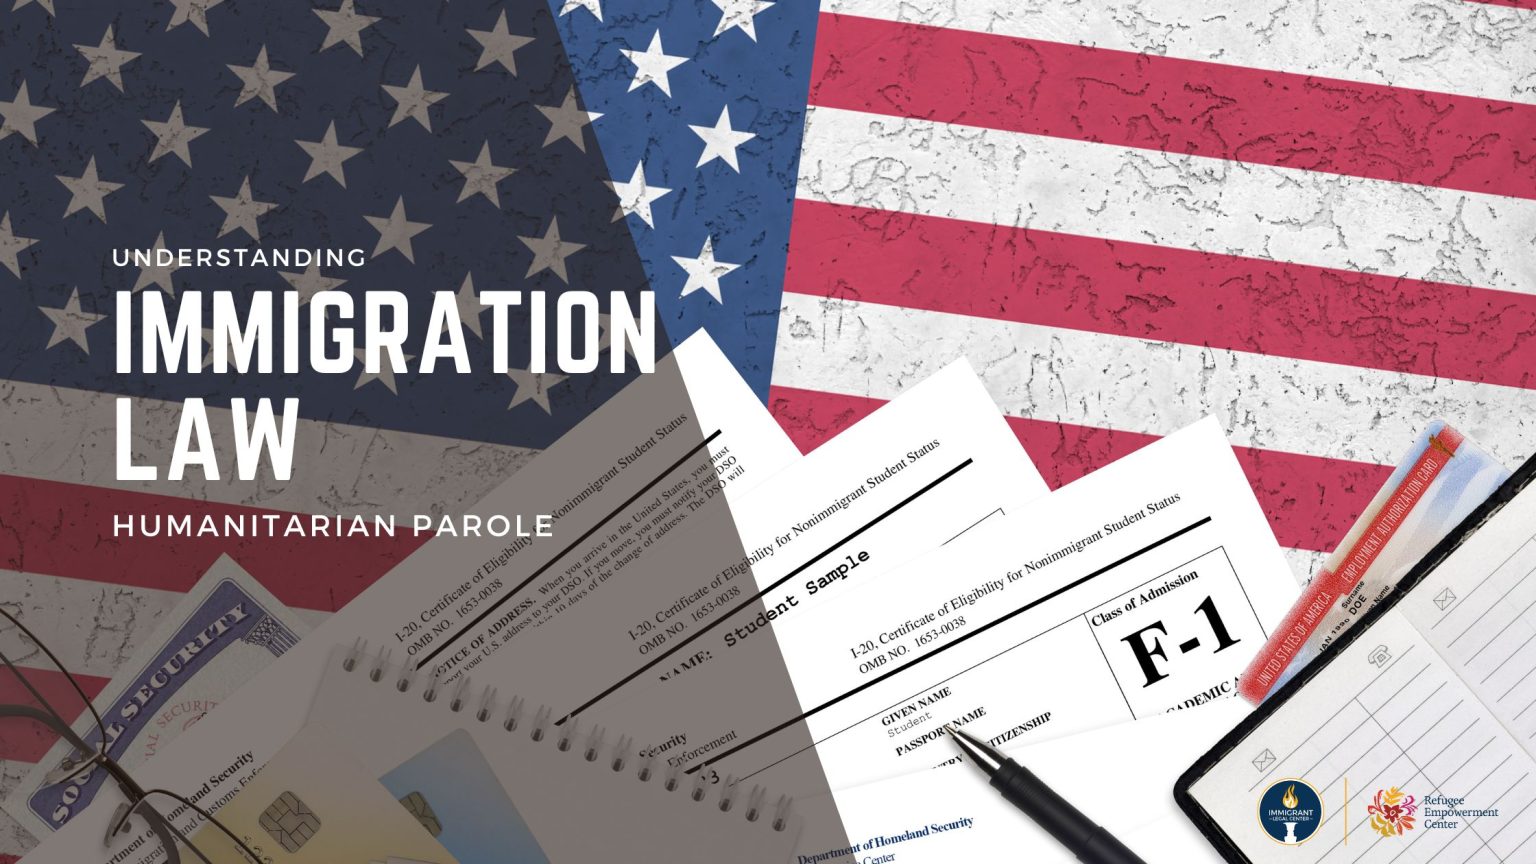 Understanding immigration law text over an American flag with immigration documents